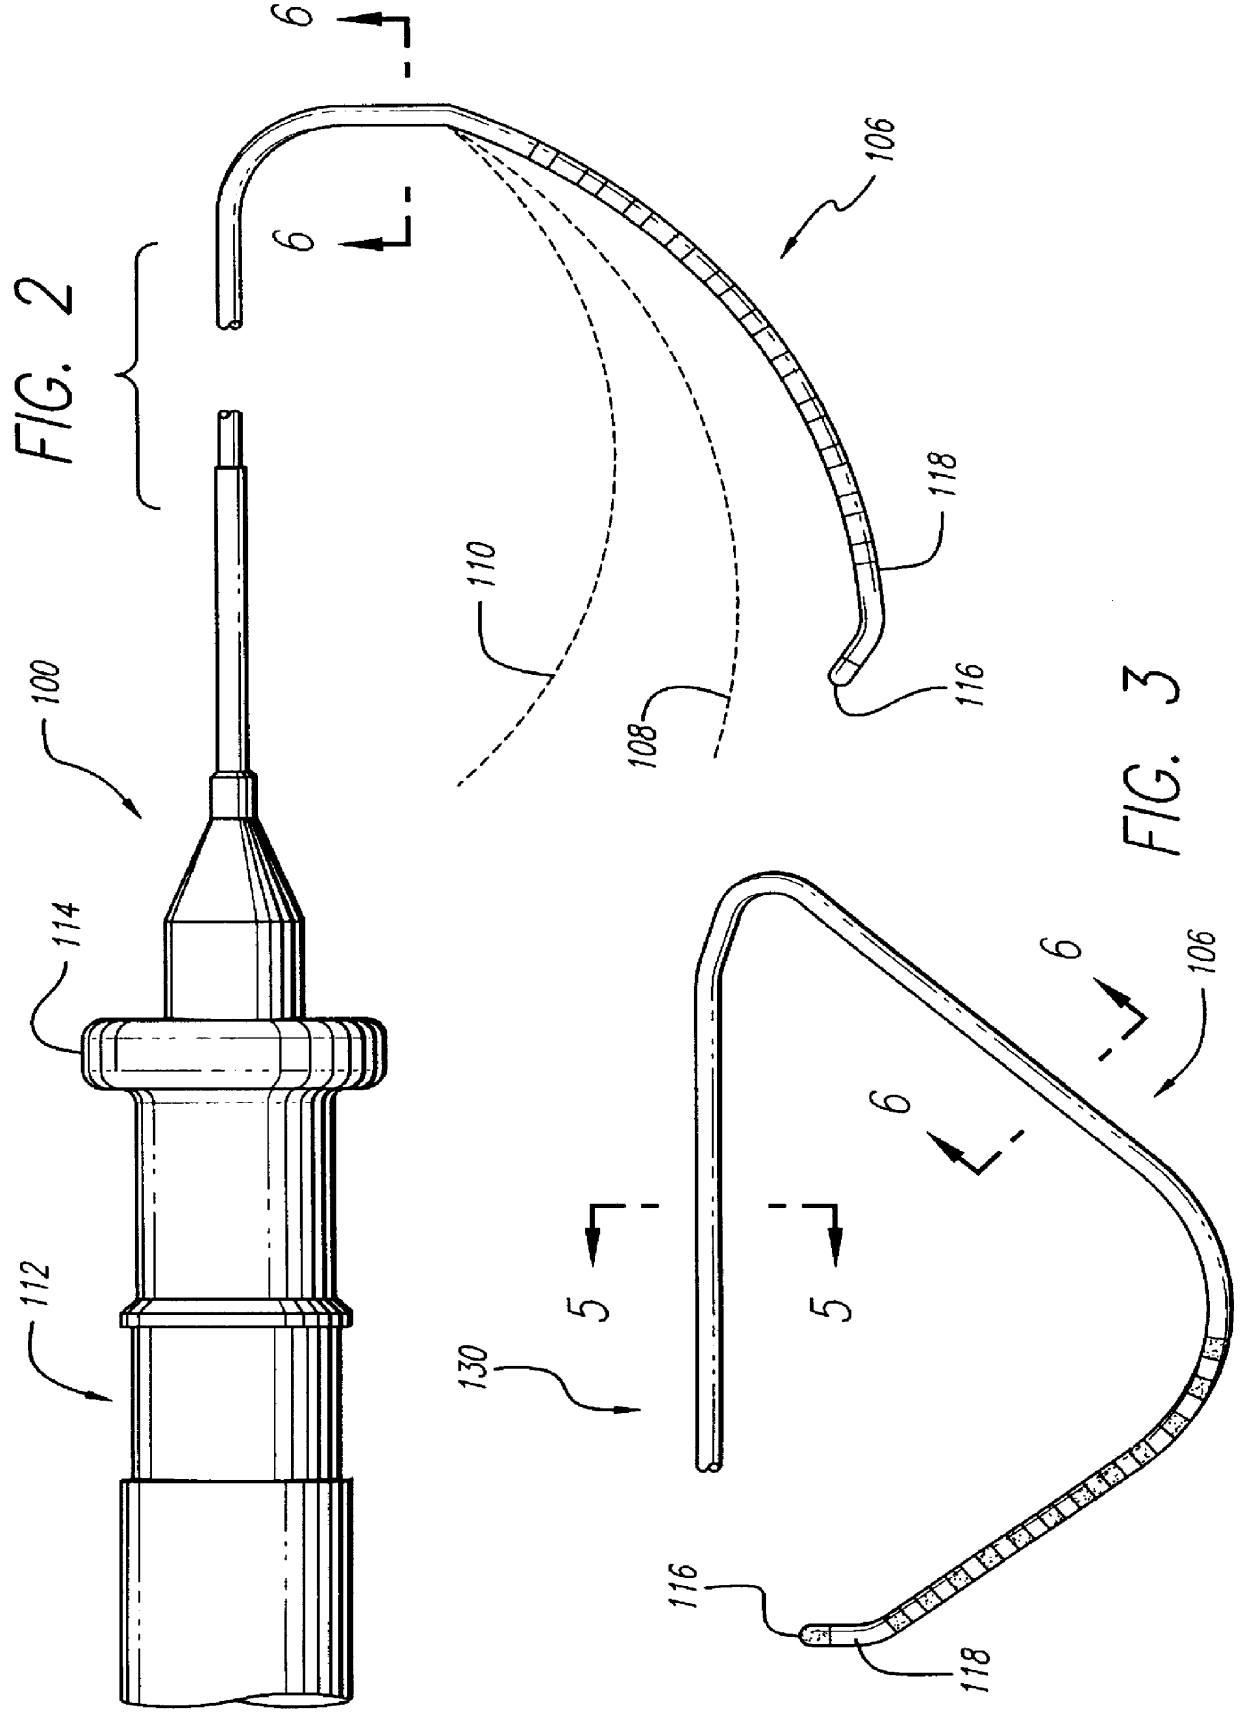 Steerable catheter with preformed distal shape and method for use